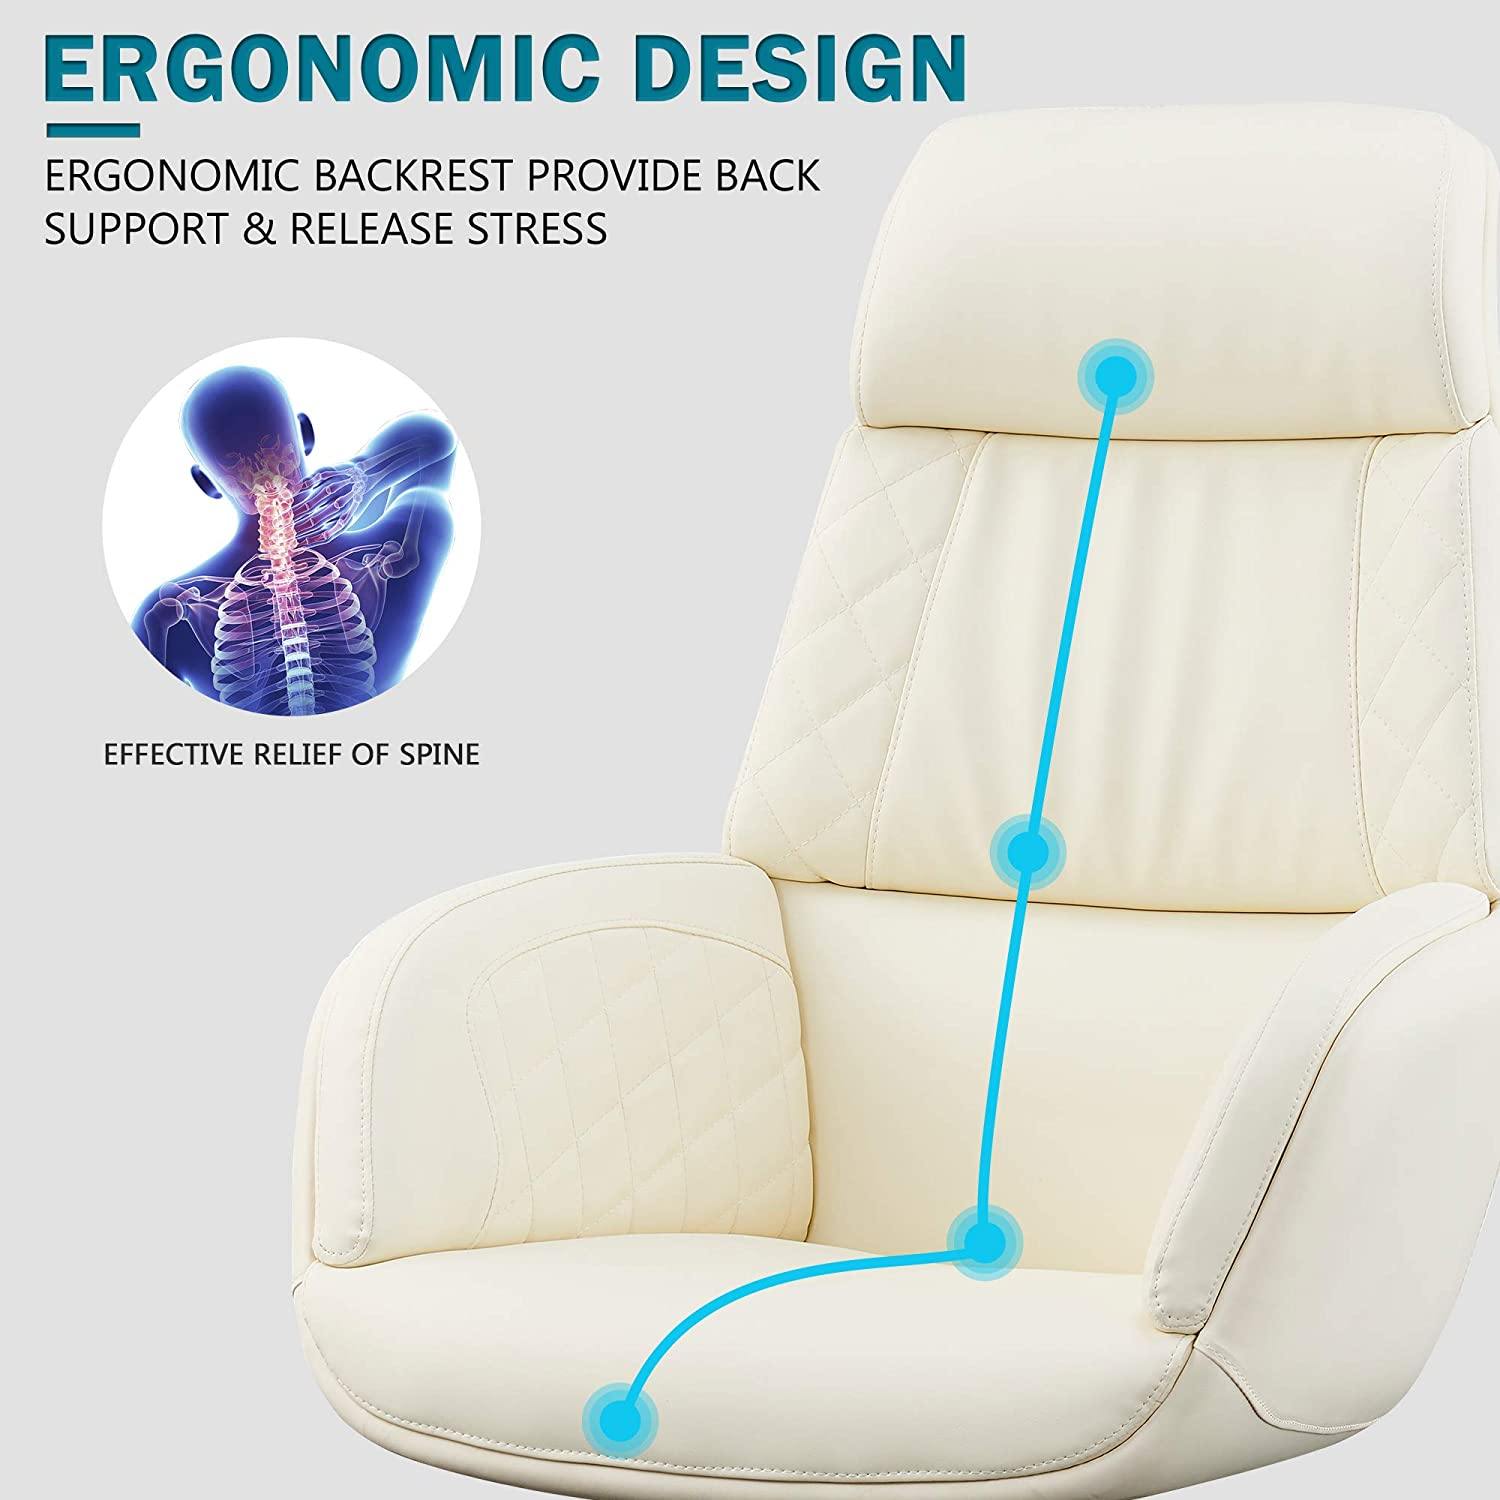 Ergonomic Office Chair High Back Executive PU Leather Upholstered Swivel Chair with Headrest & Thick Padding Armrest Adjustable Desk Chair Task - Bosonshop